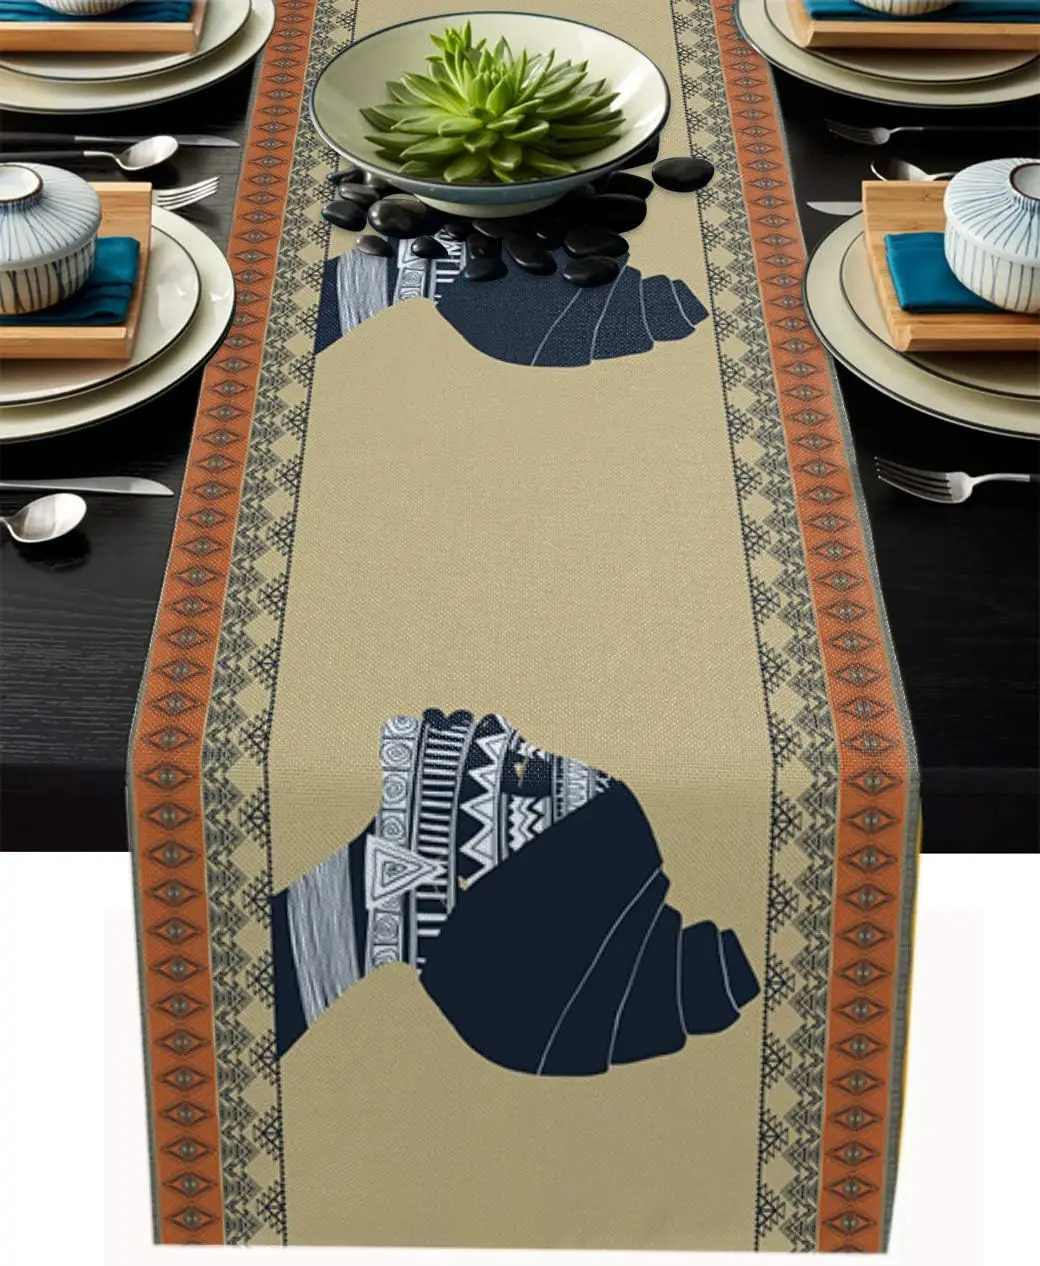 

African Women Printed Linen Table Runners Dresser Scarf Table Decor Farmhouse Holiday Wedding Party Kitchen Dining Table Decor